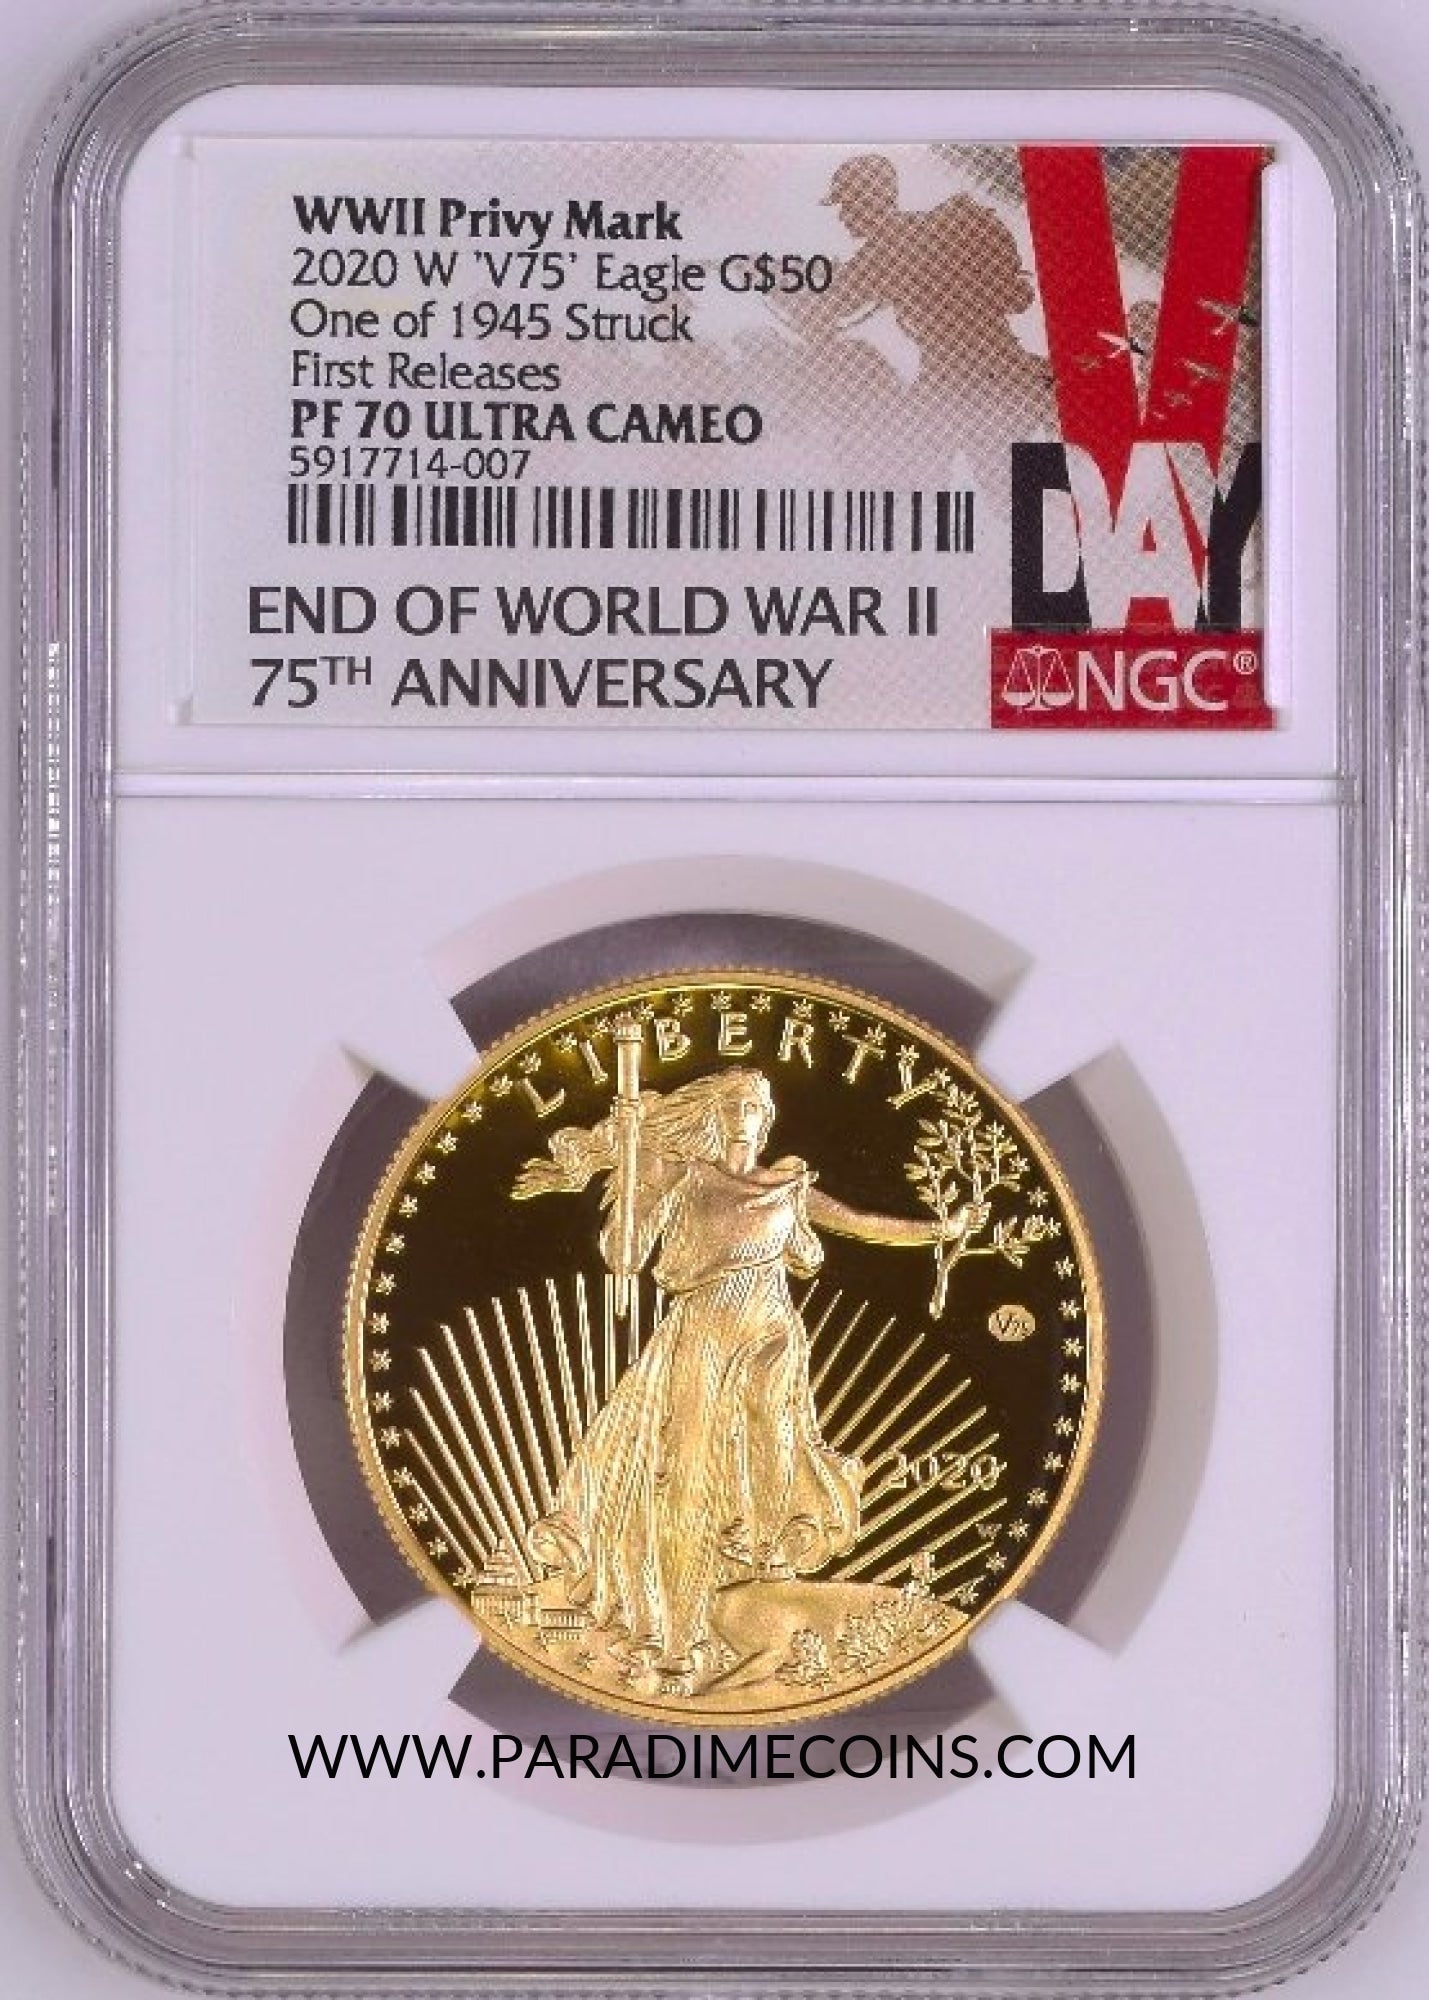 2020-W V75 $50 WWII Privy NGC PF70UCAM First Releases 20XE American Gold Eagle #4 - Paradime Coins | PCGS NGC CACG CAC Rare US Numismatic Coins For Sale